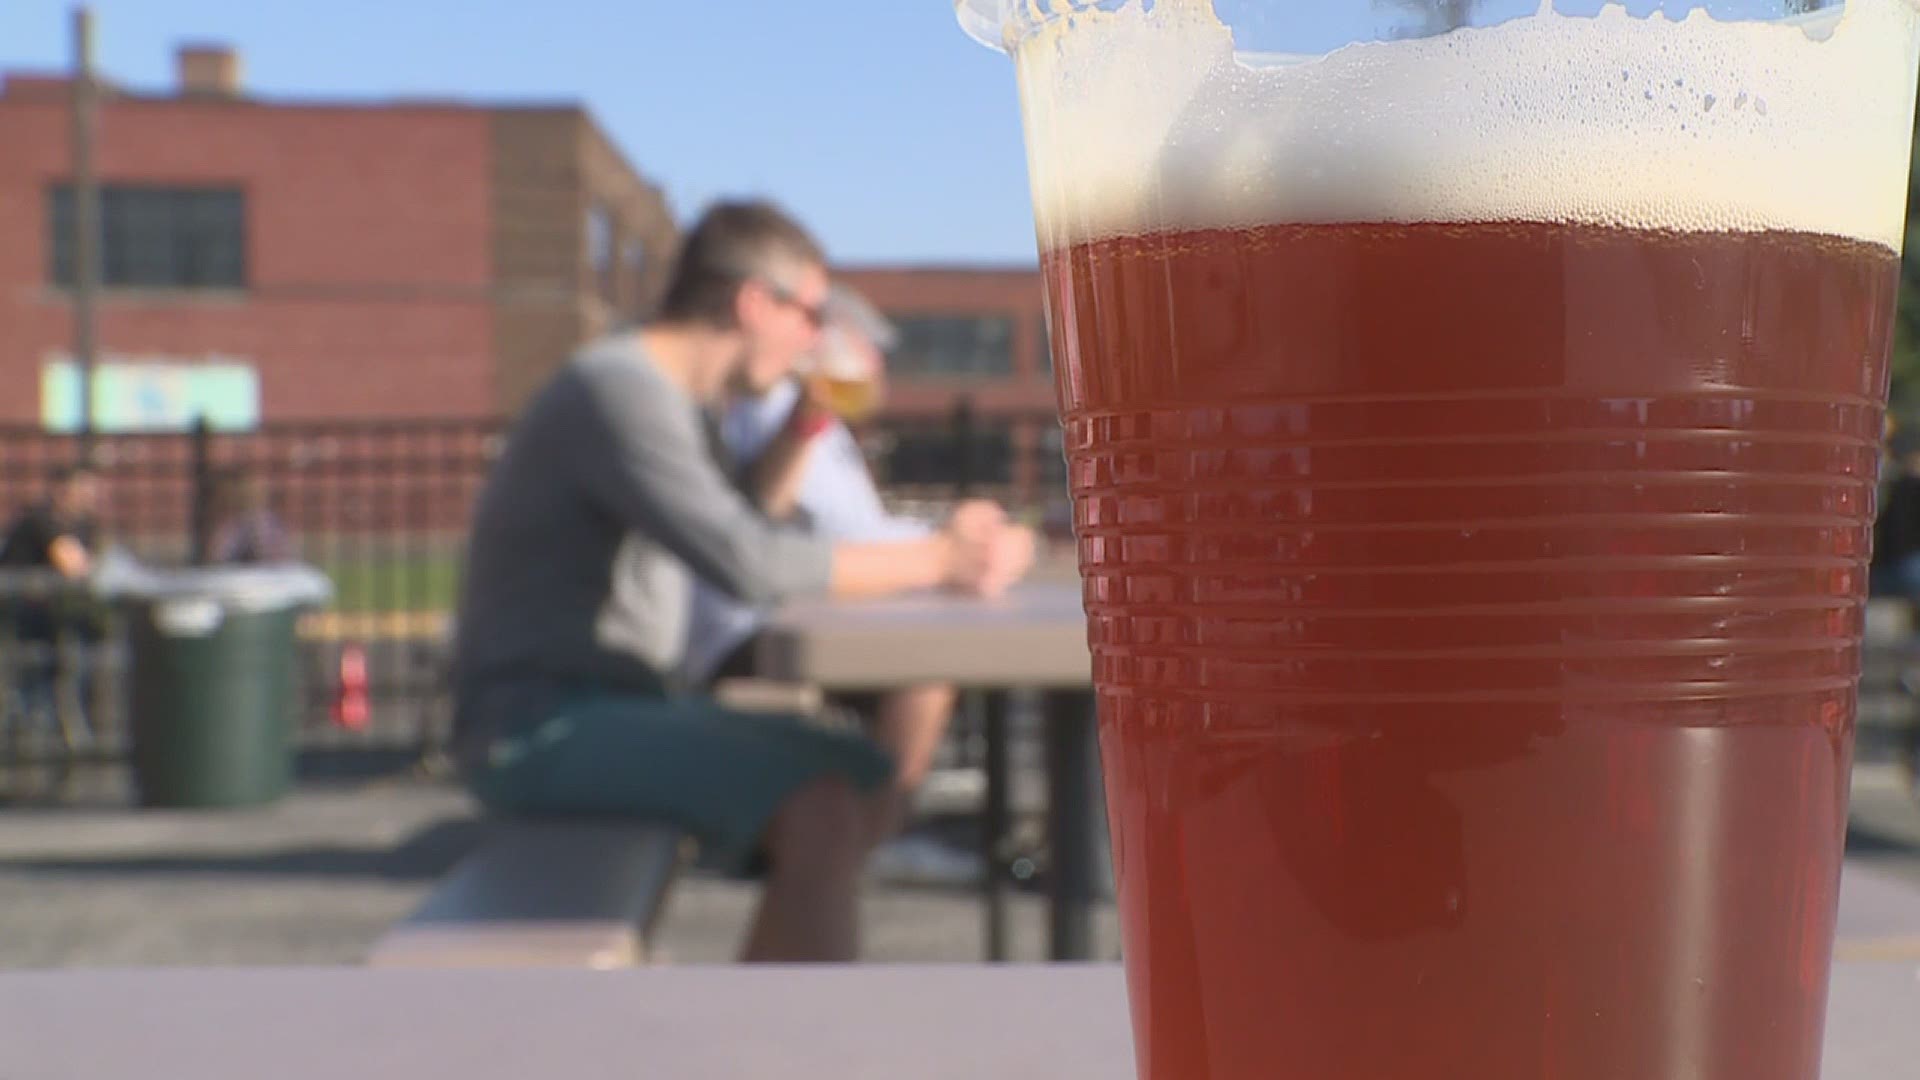 This year, the week will feature specific regions and cities each night. The event kicks off on Monday night with all things Rock Island Brewers.